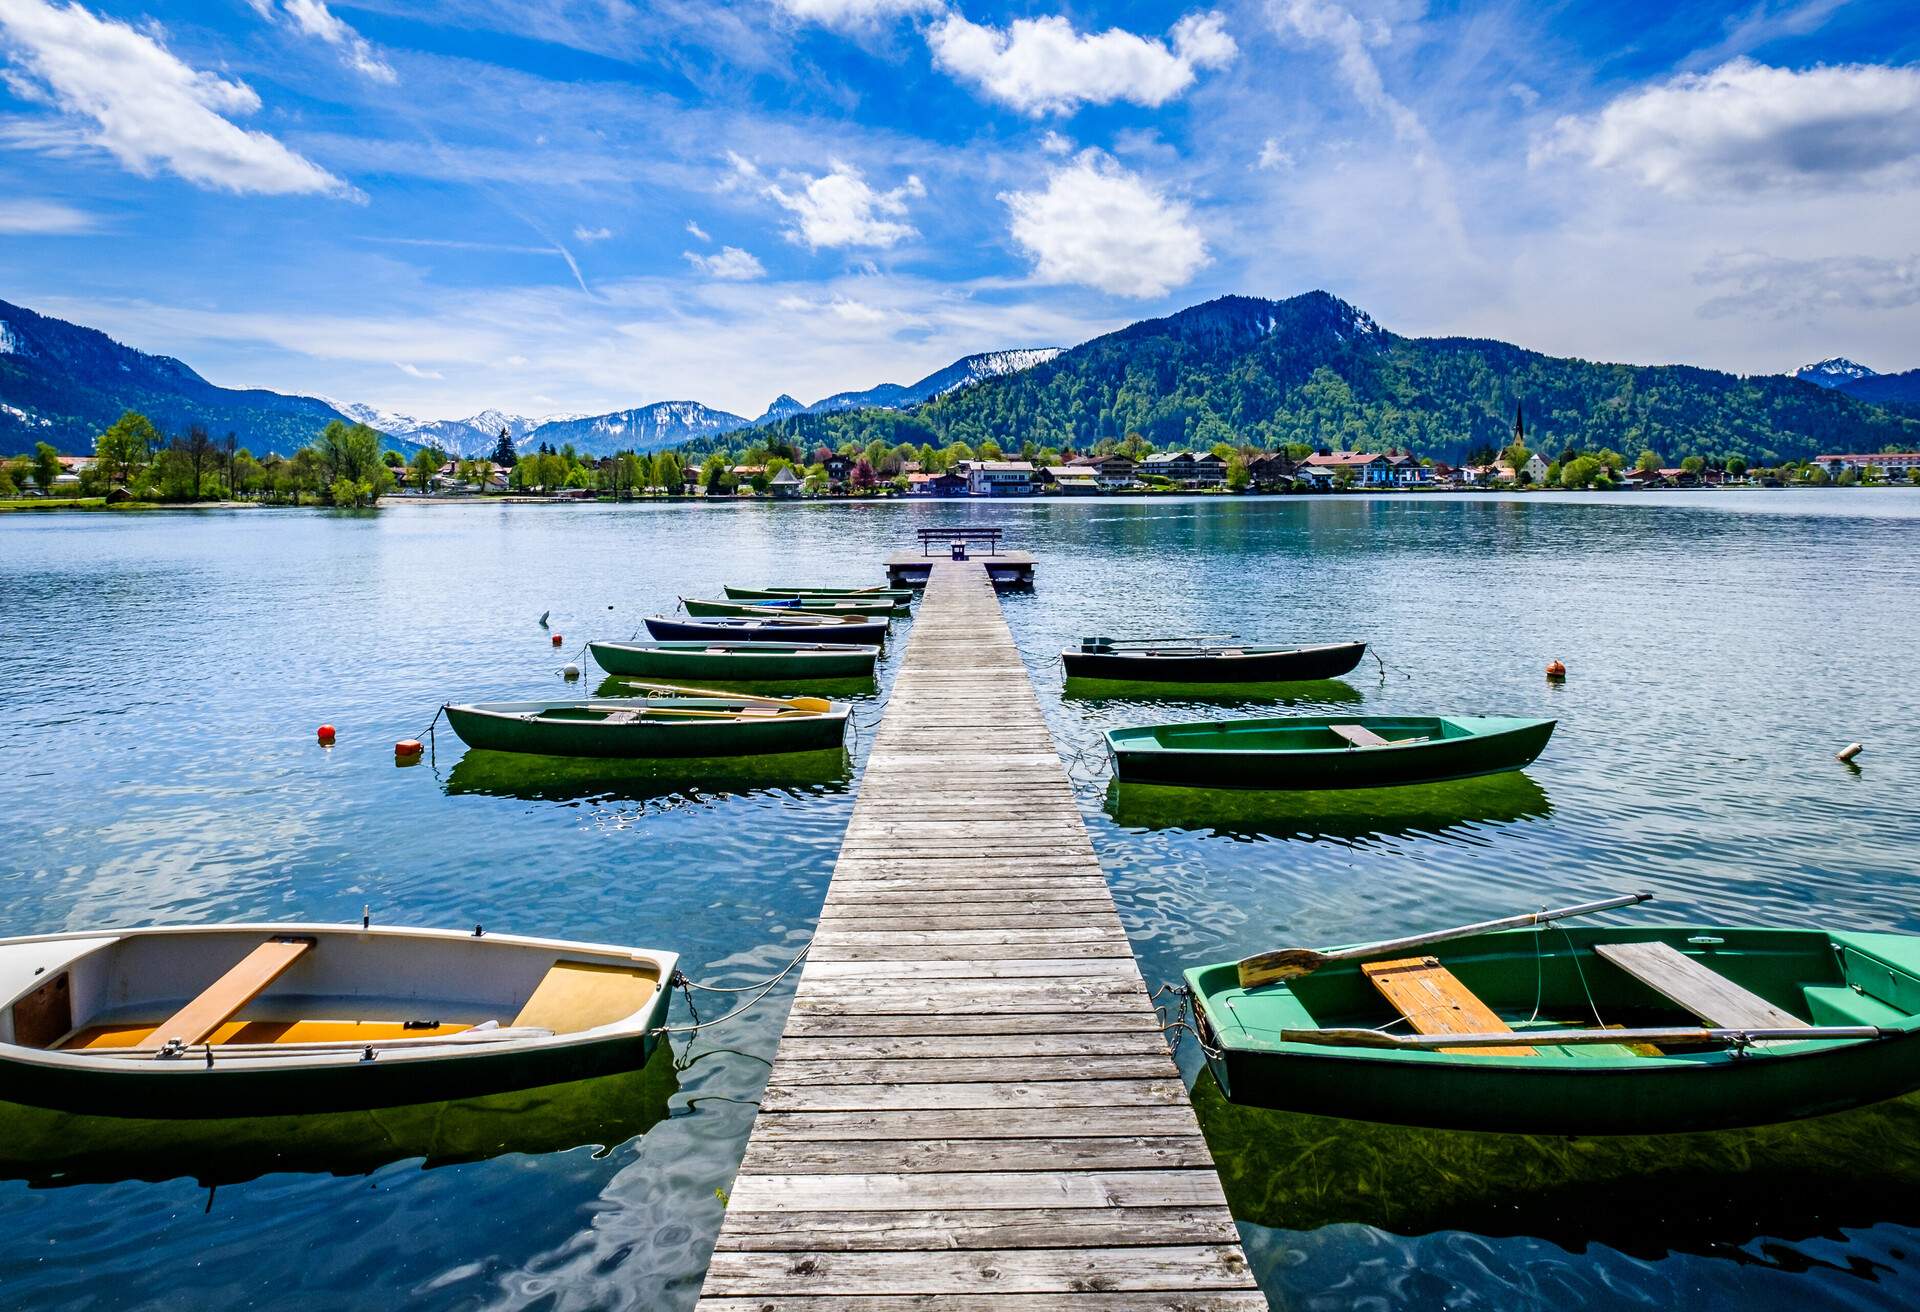 scenery at the tegernsee lake in bavaria - germany